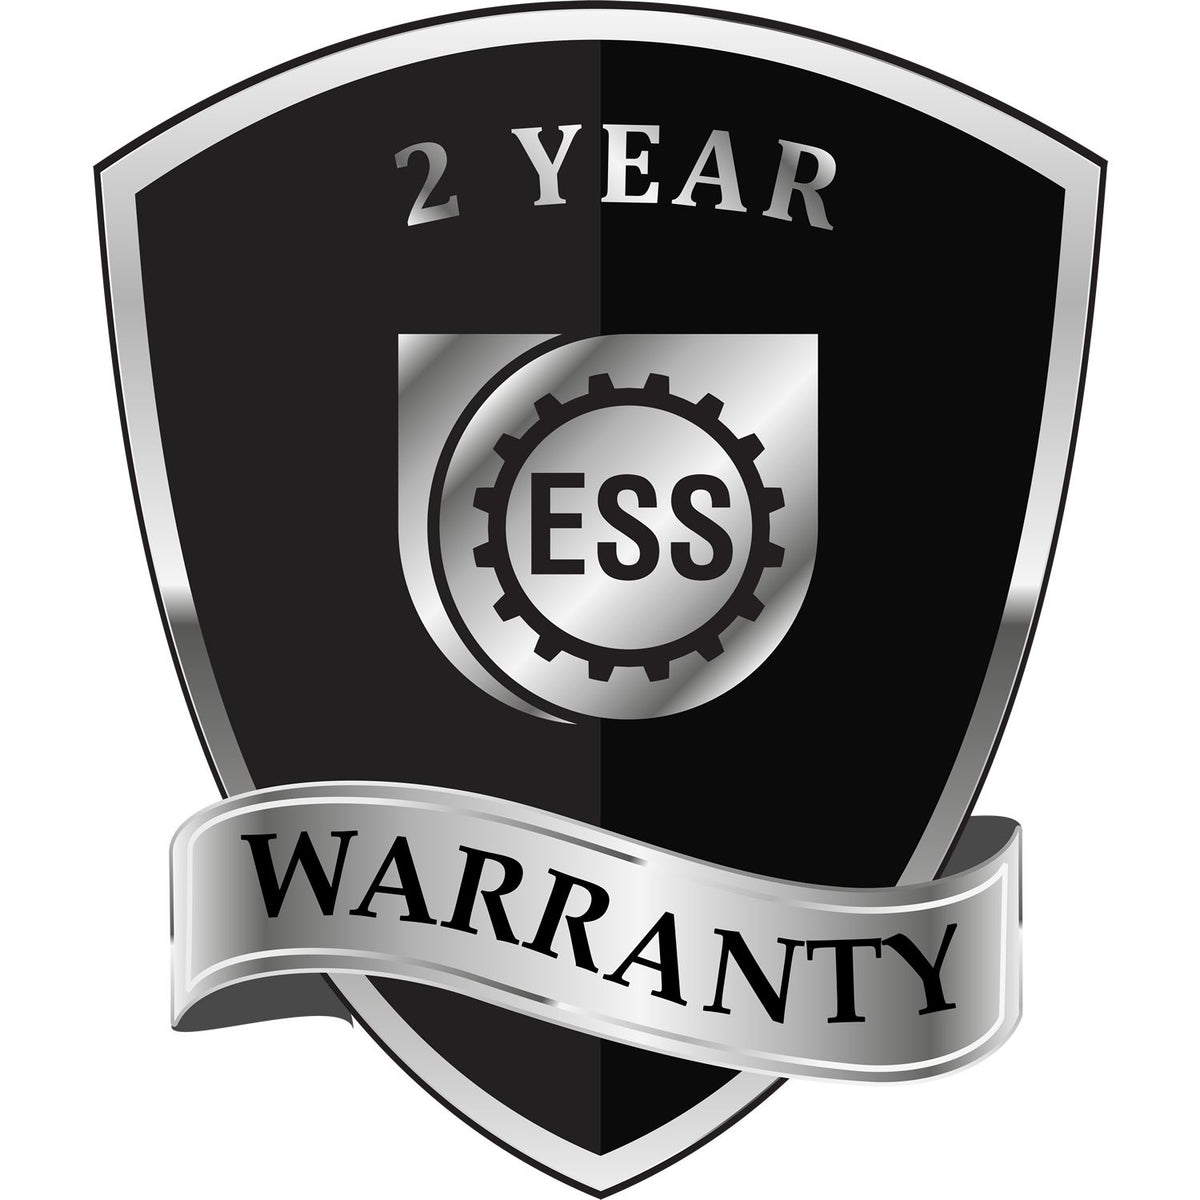 A black and silver badge or emblem showing warranty information for the Heavy Duty Cast Iron New Mexico Geologist Seal Embosser